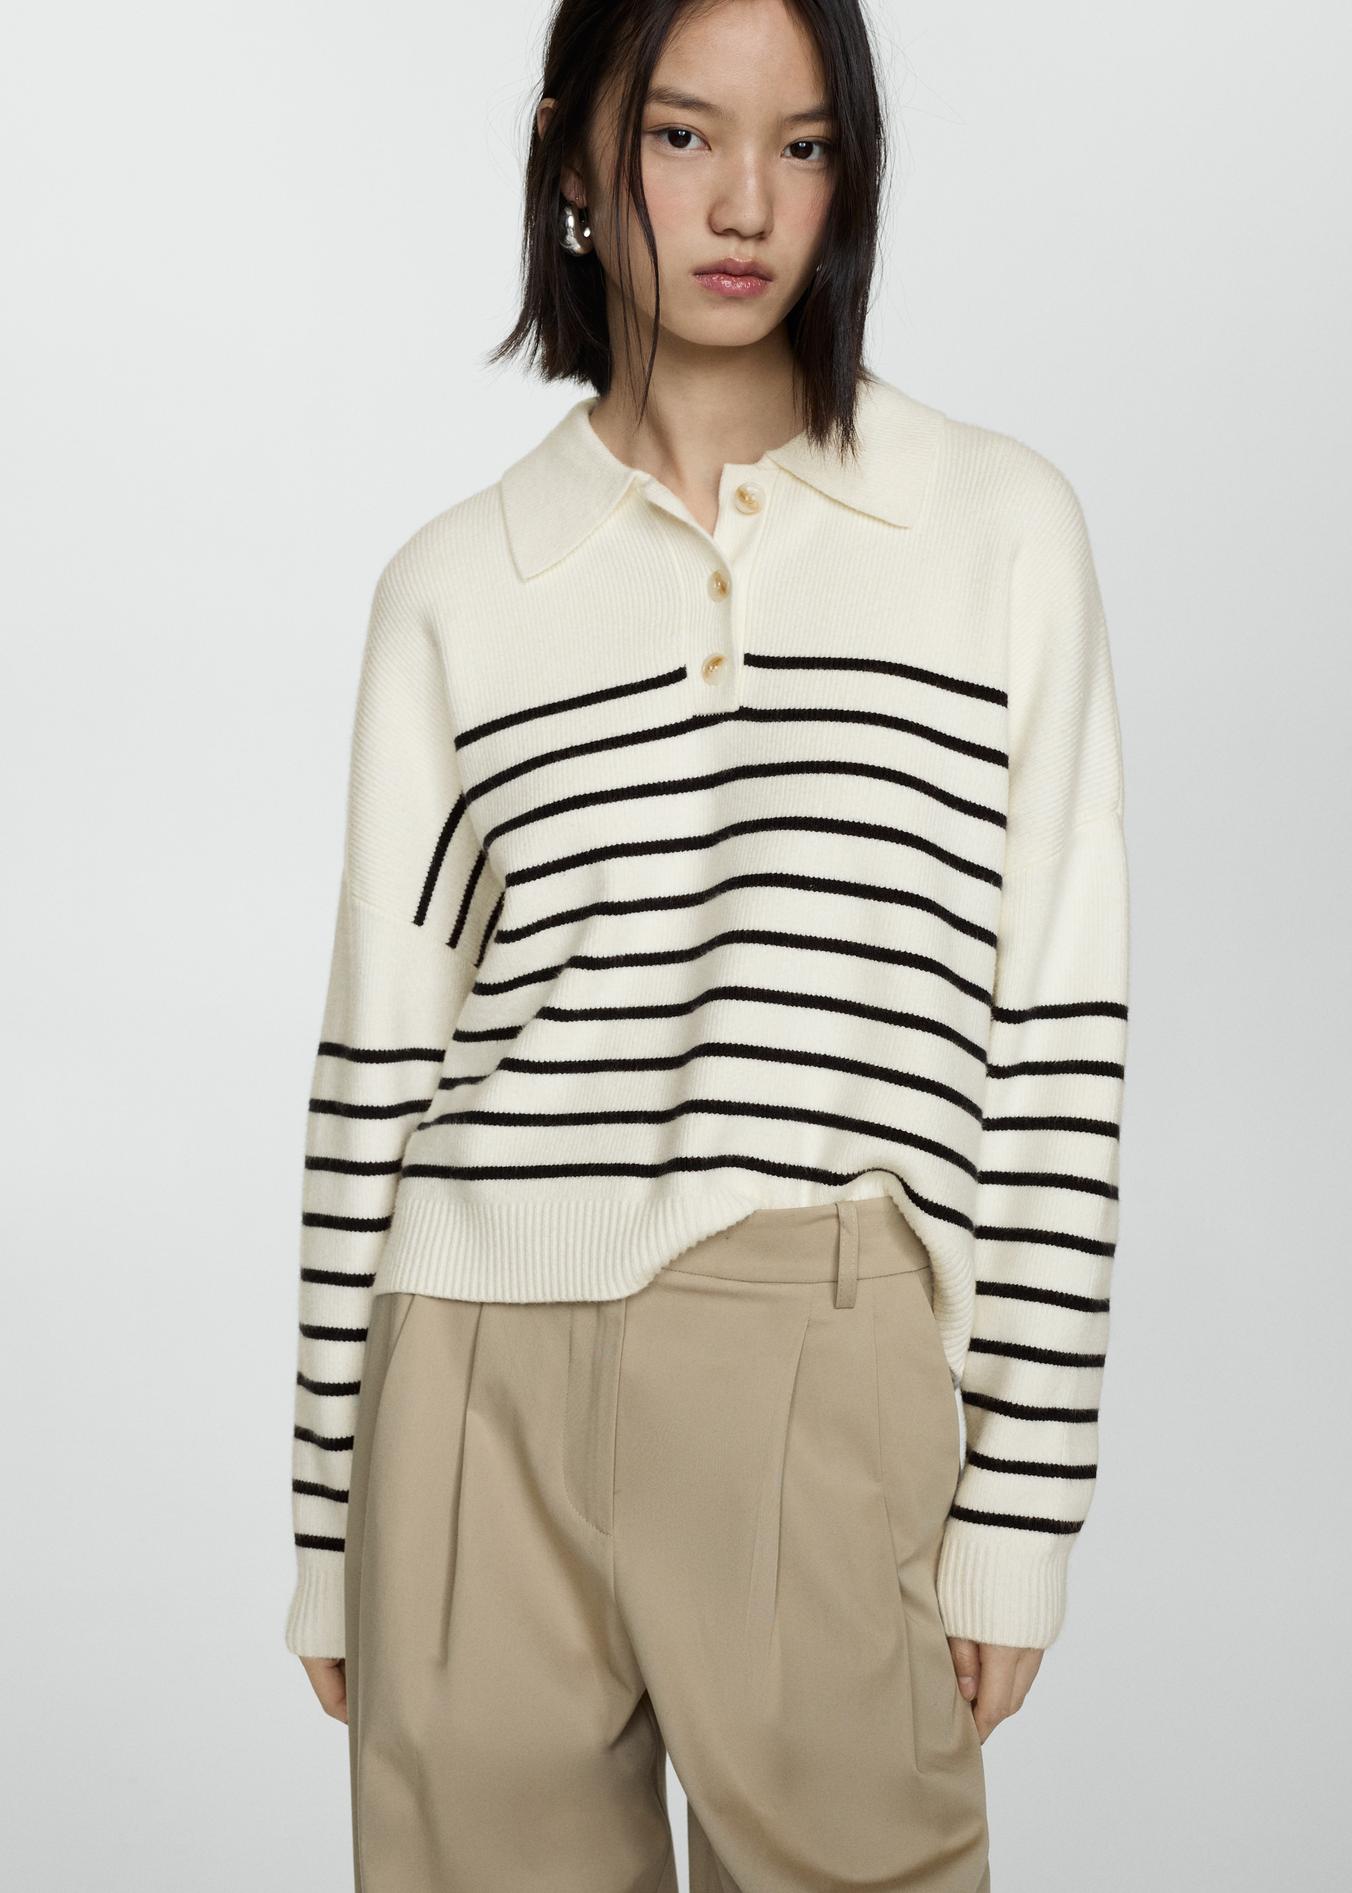 Buttoned collar knit sweater offers at $29.99 in Mango